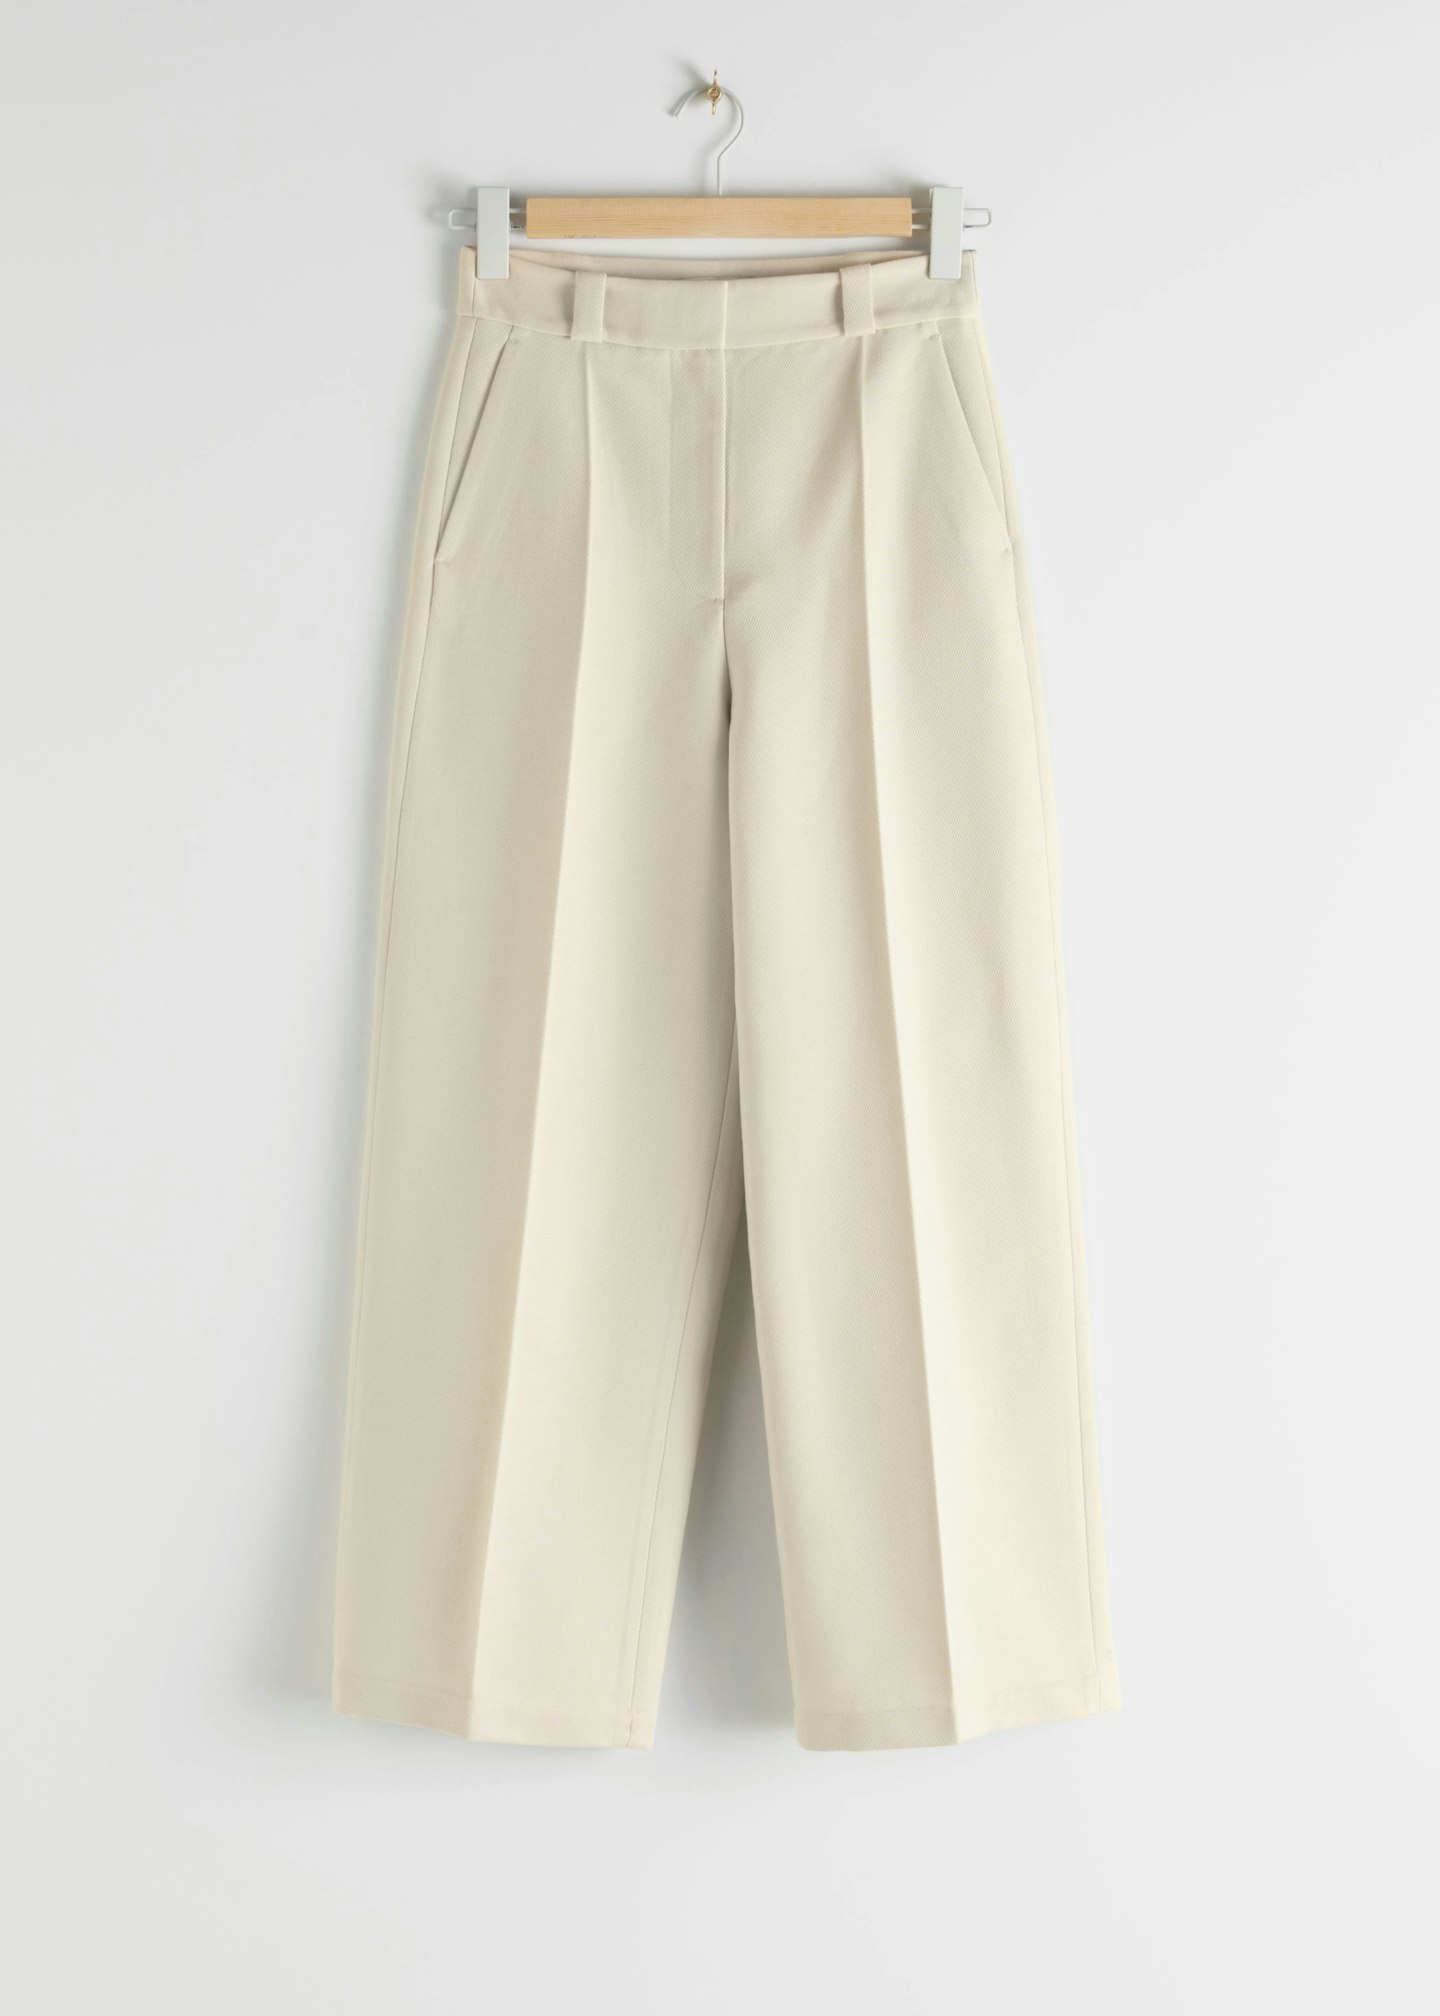 & Other Stories, Wide Leg Wool Twill Trousers, £65